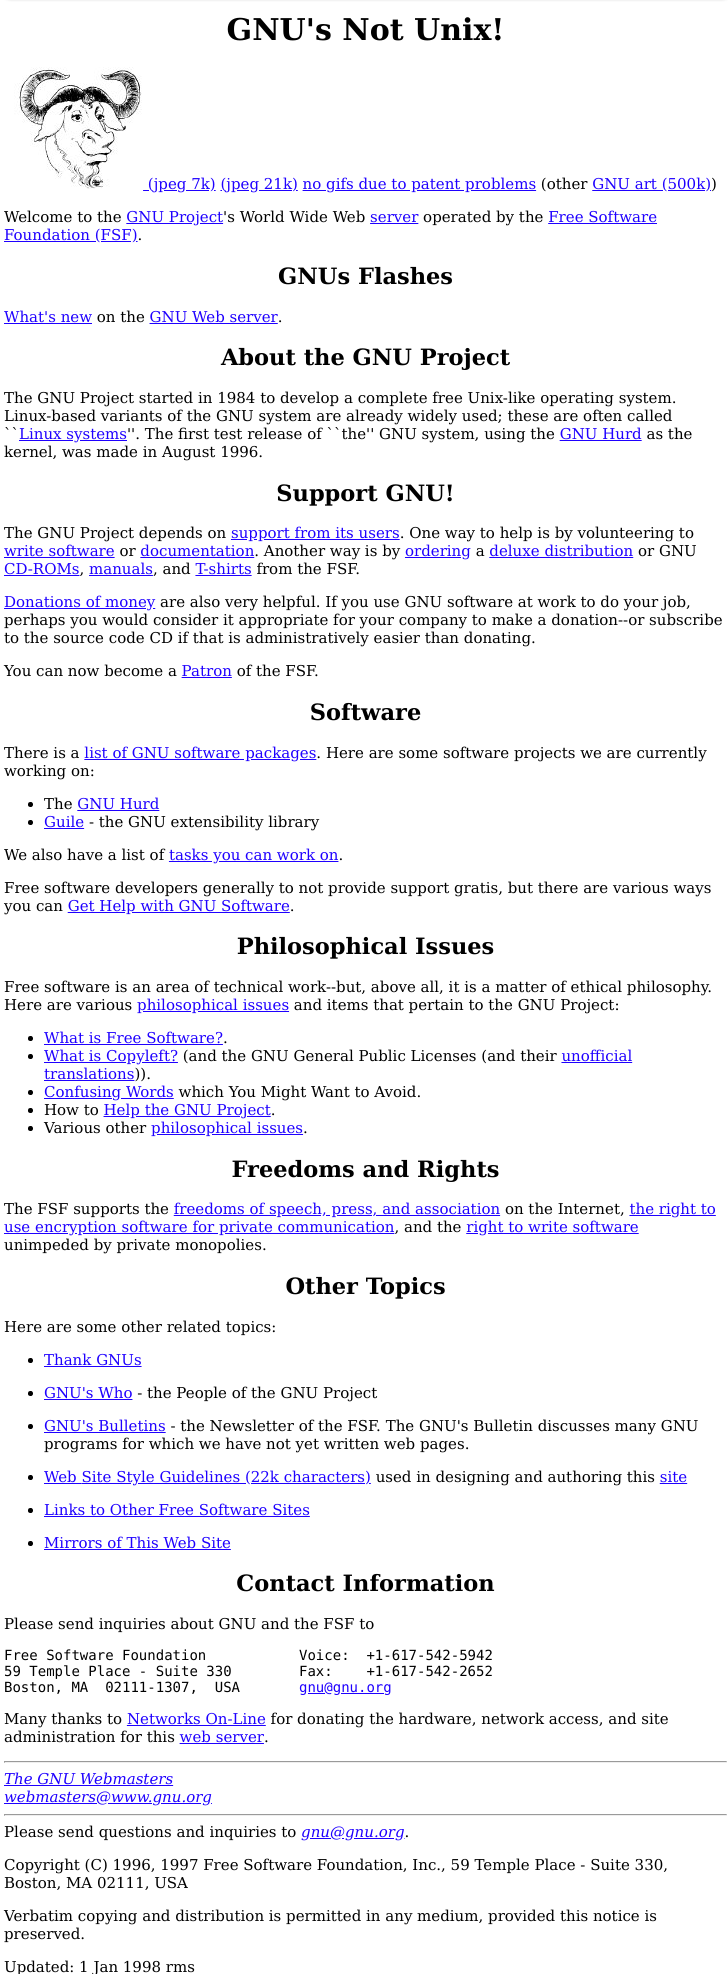 The FSF's Web site in 1998